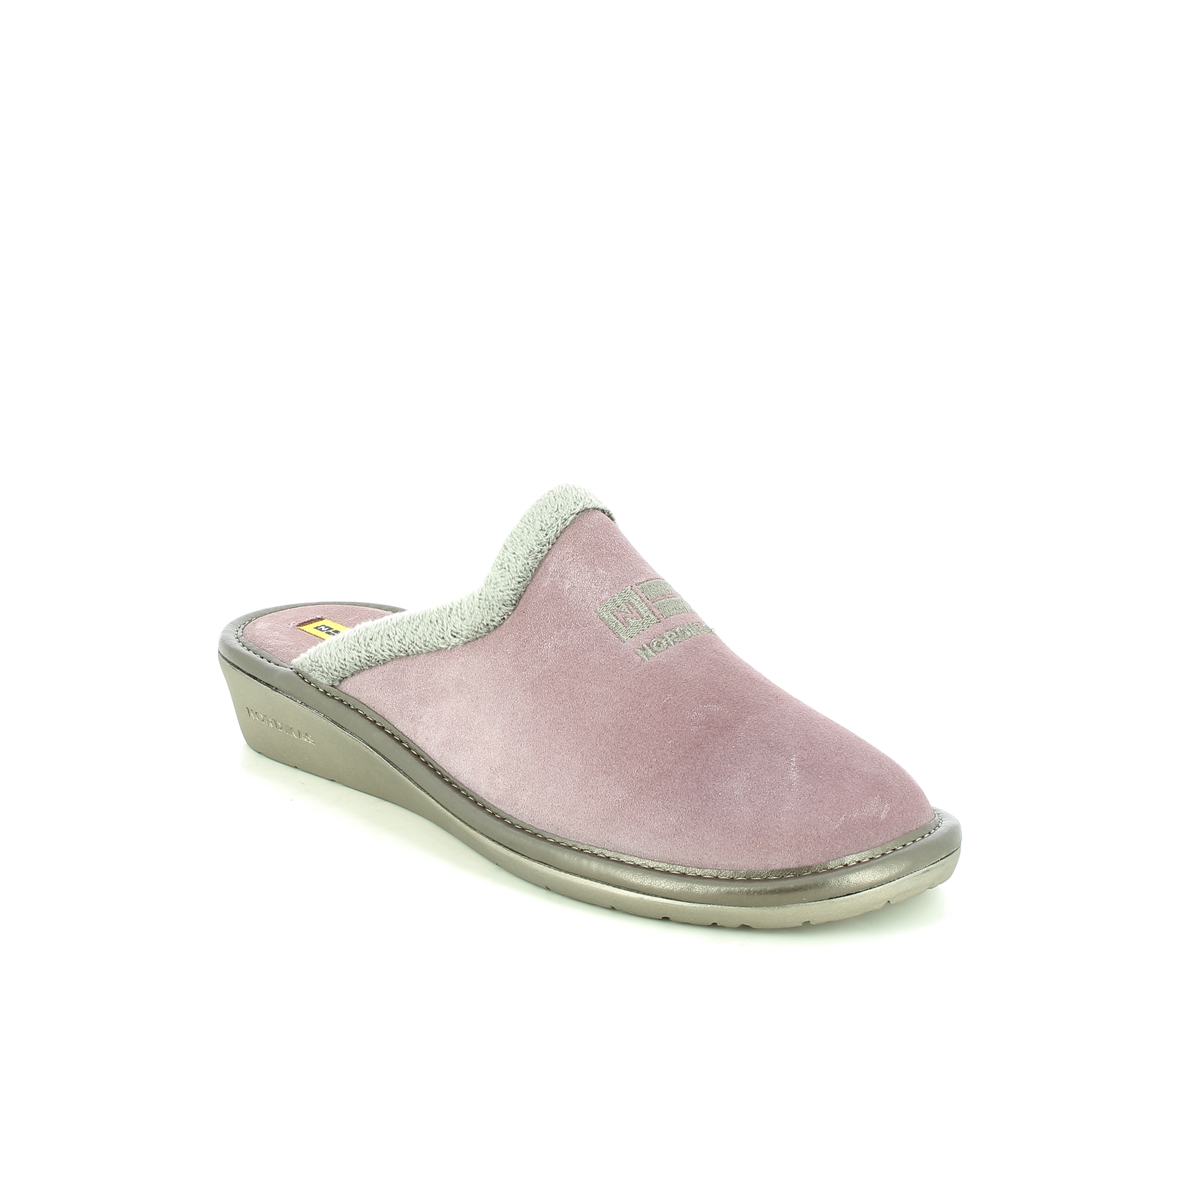 Nordikas Musue Pink Suede Womens Slipper Mules 238O-8   Natala 3 In Size 41 In Plain Pink Suede